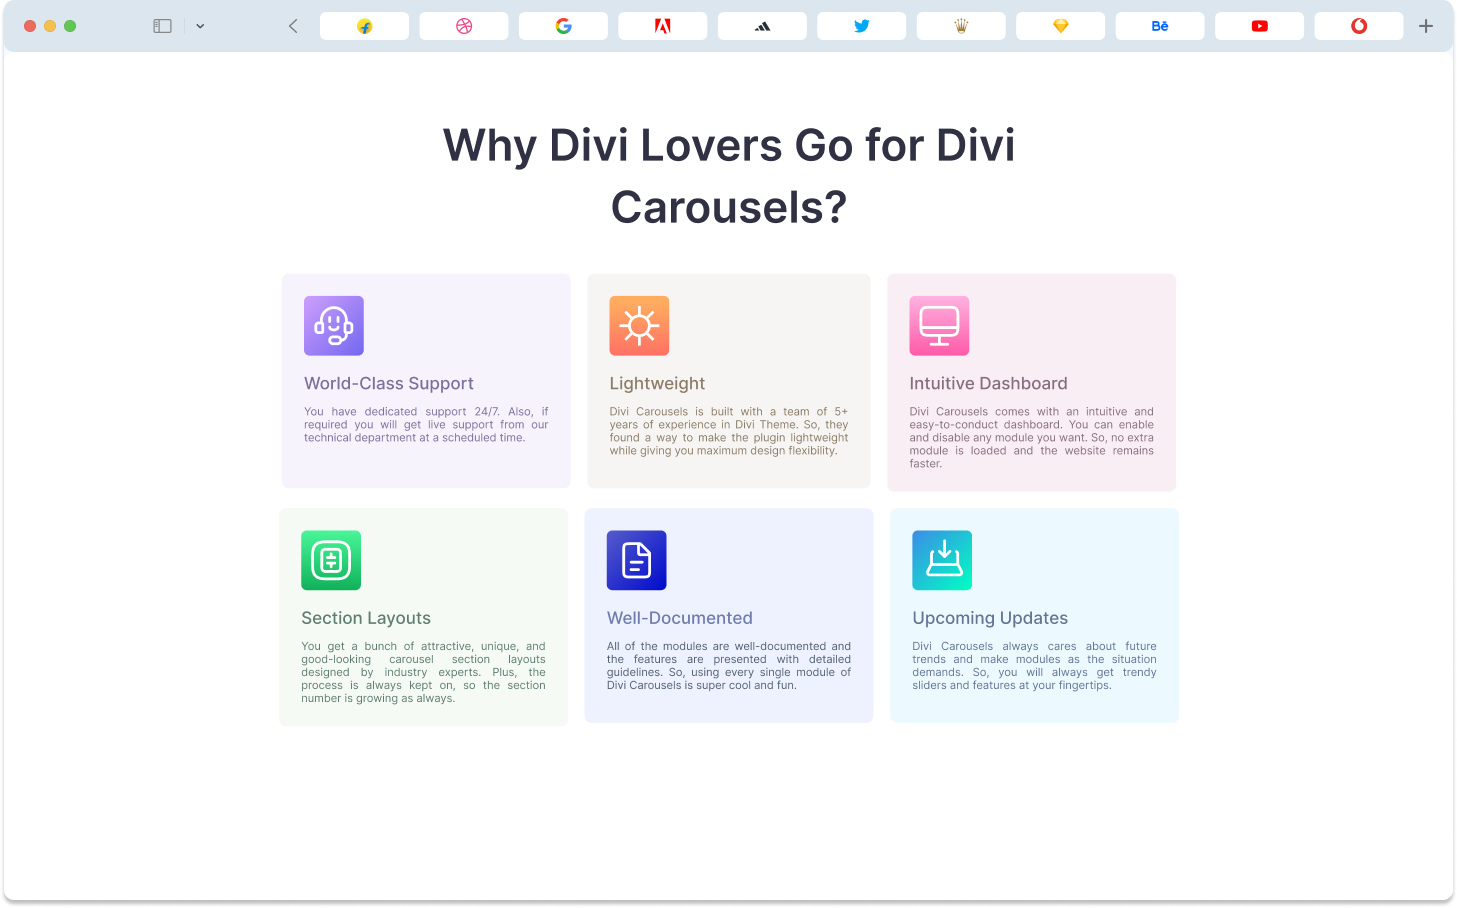 Why use divi carousel